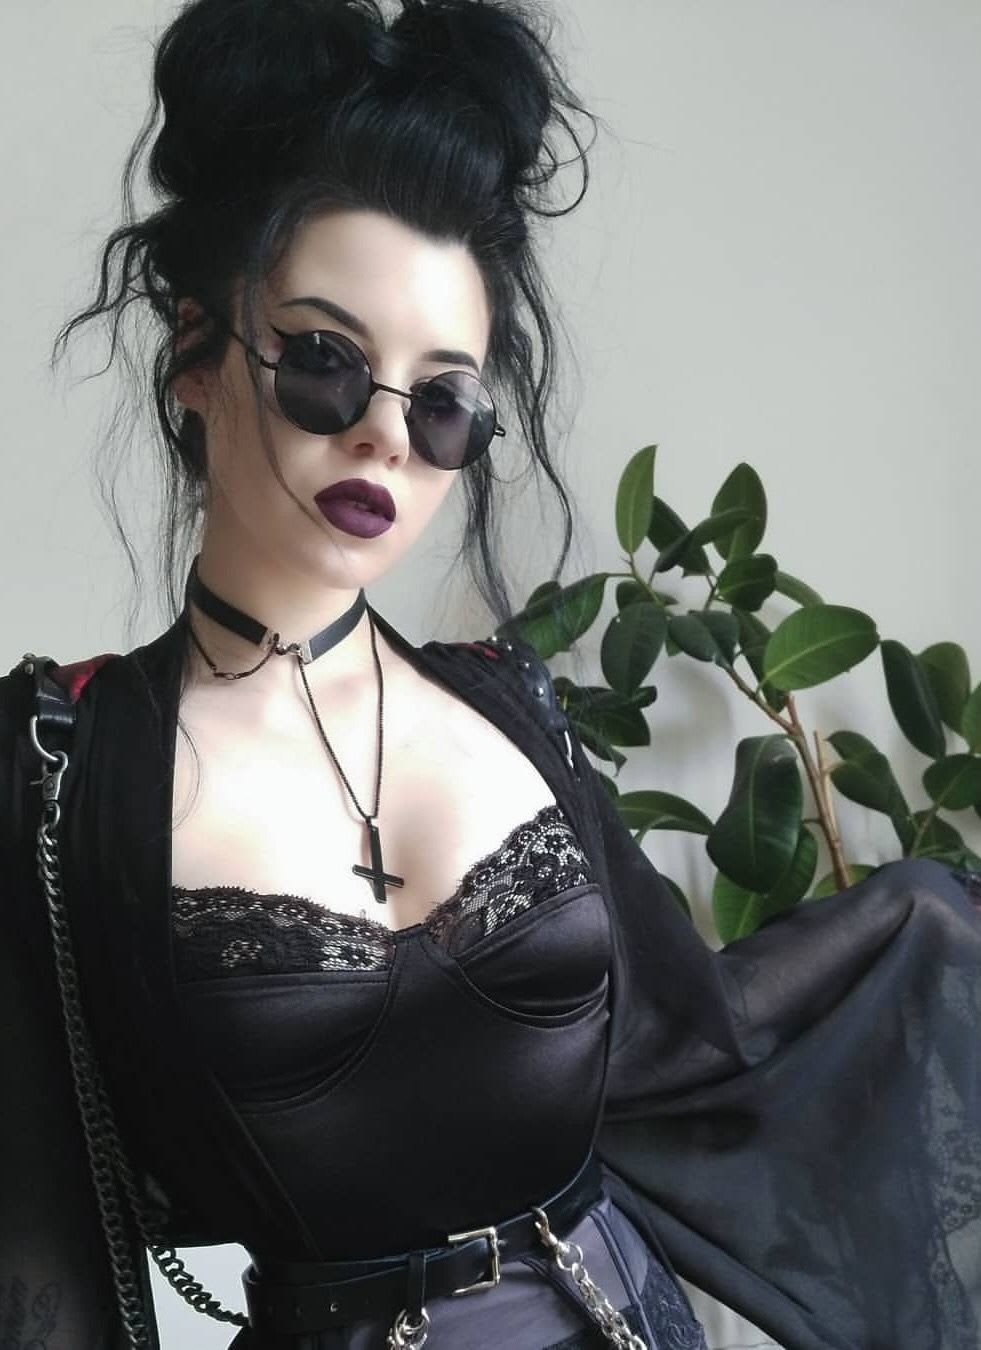 Round Vintage Style Sunglasses - Dizaster In A Halo | Aesthetic fashion, Gothic outfits, Fashion